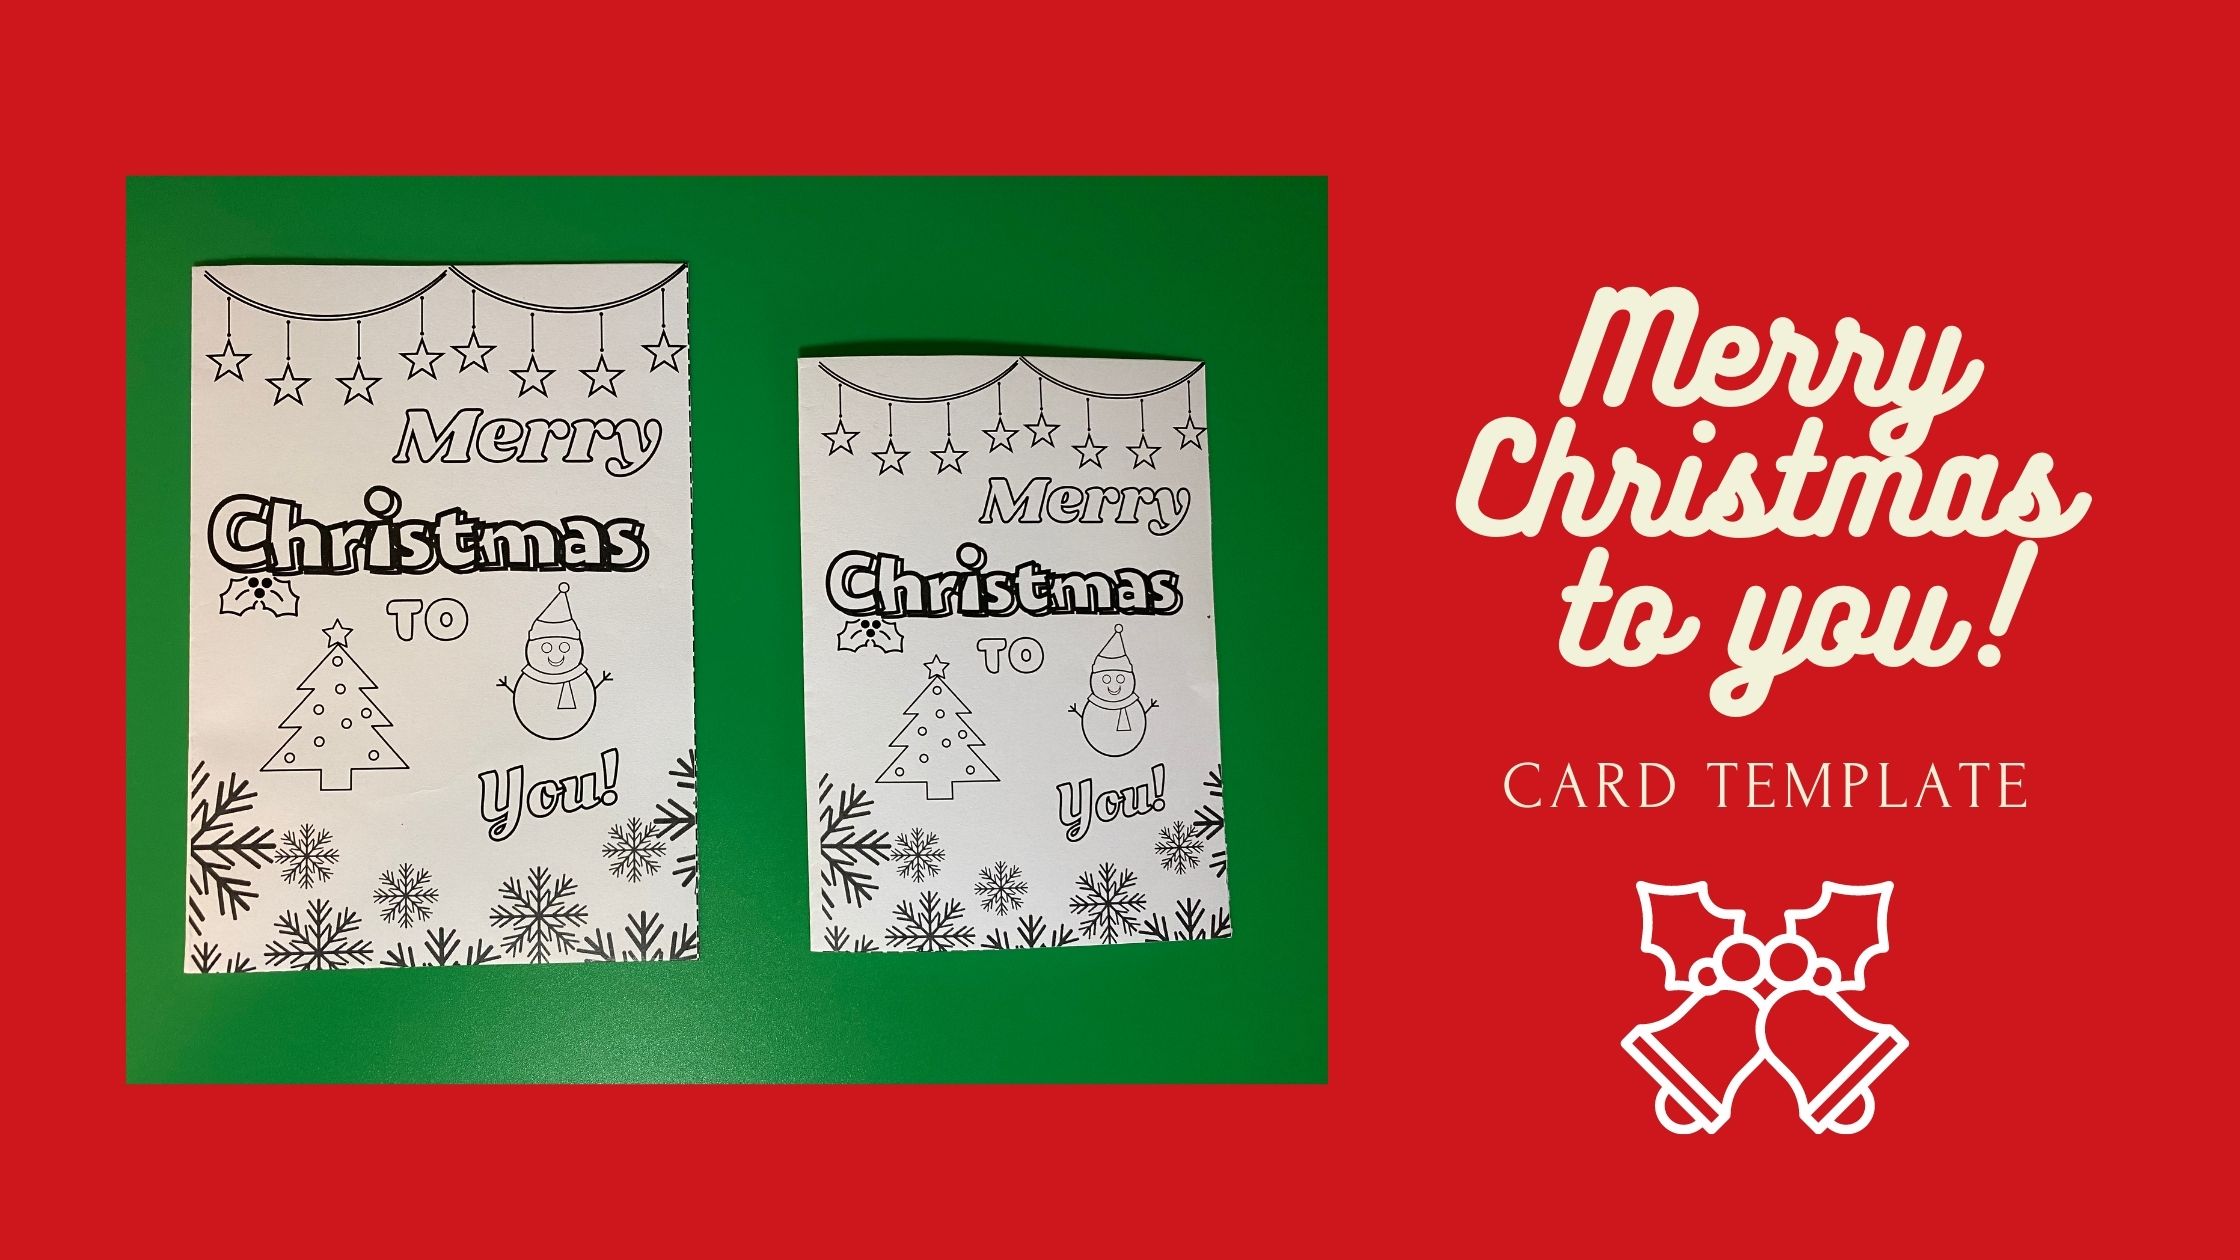 Card Template “Merry Christmas To You”